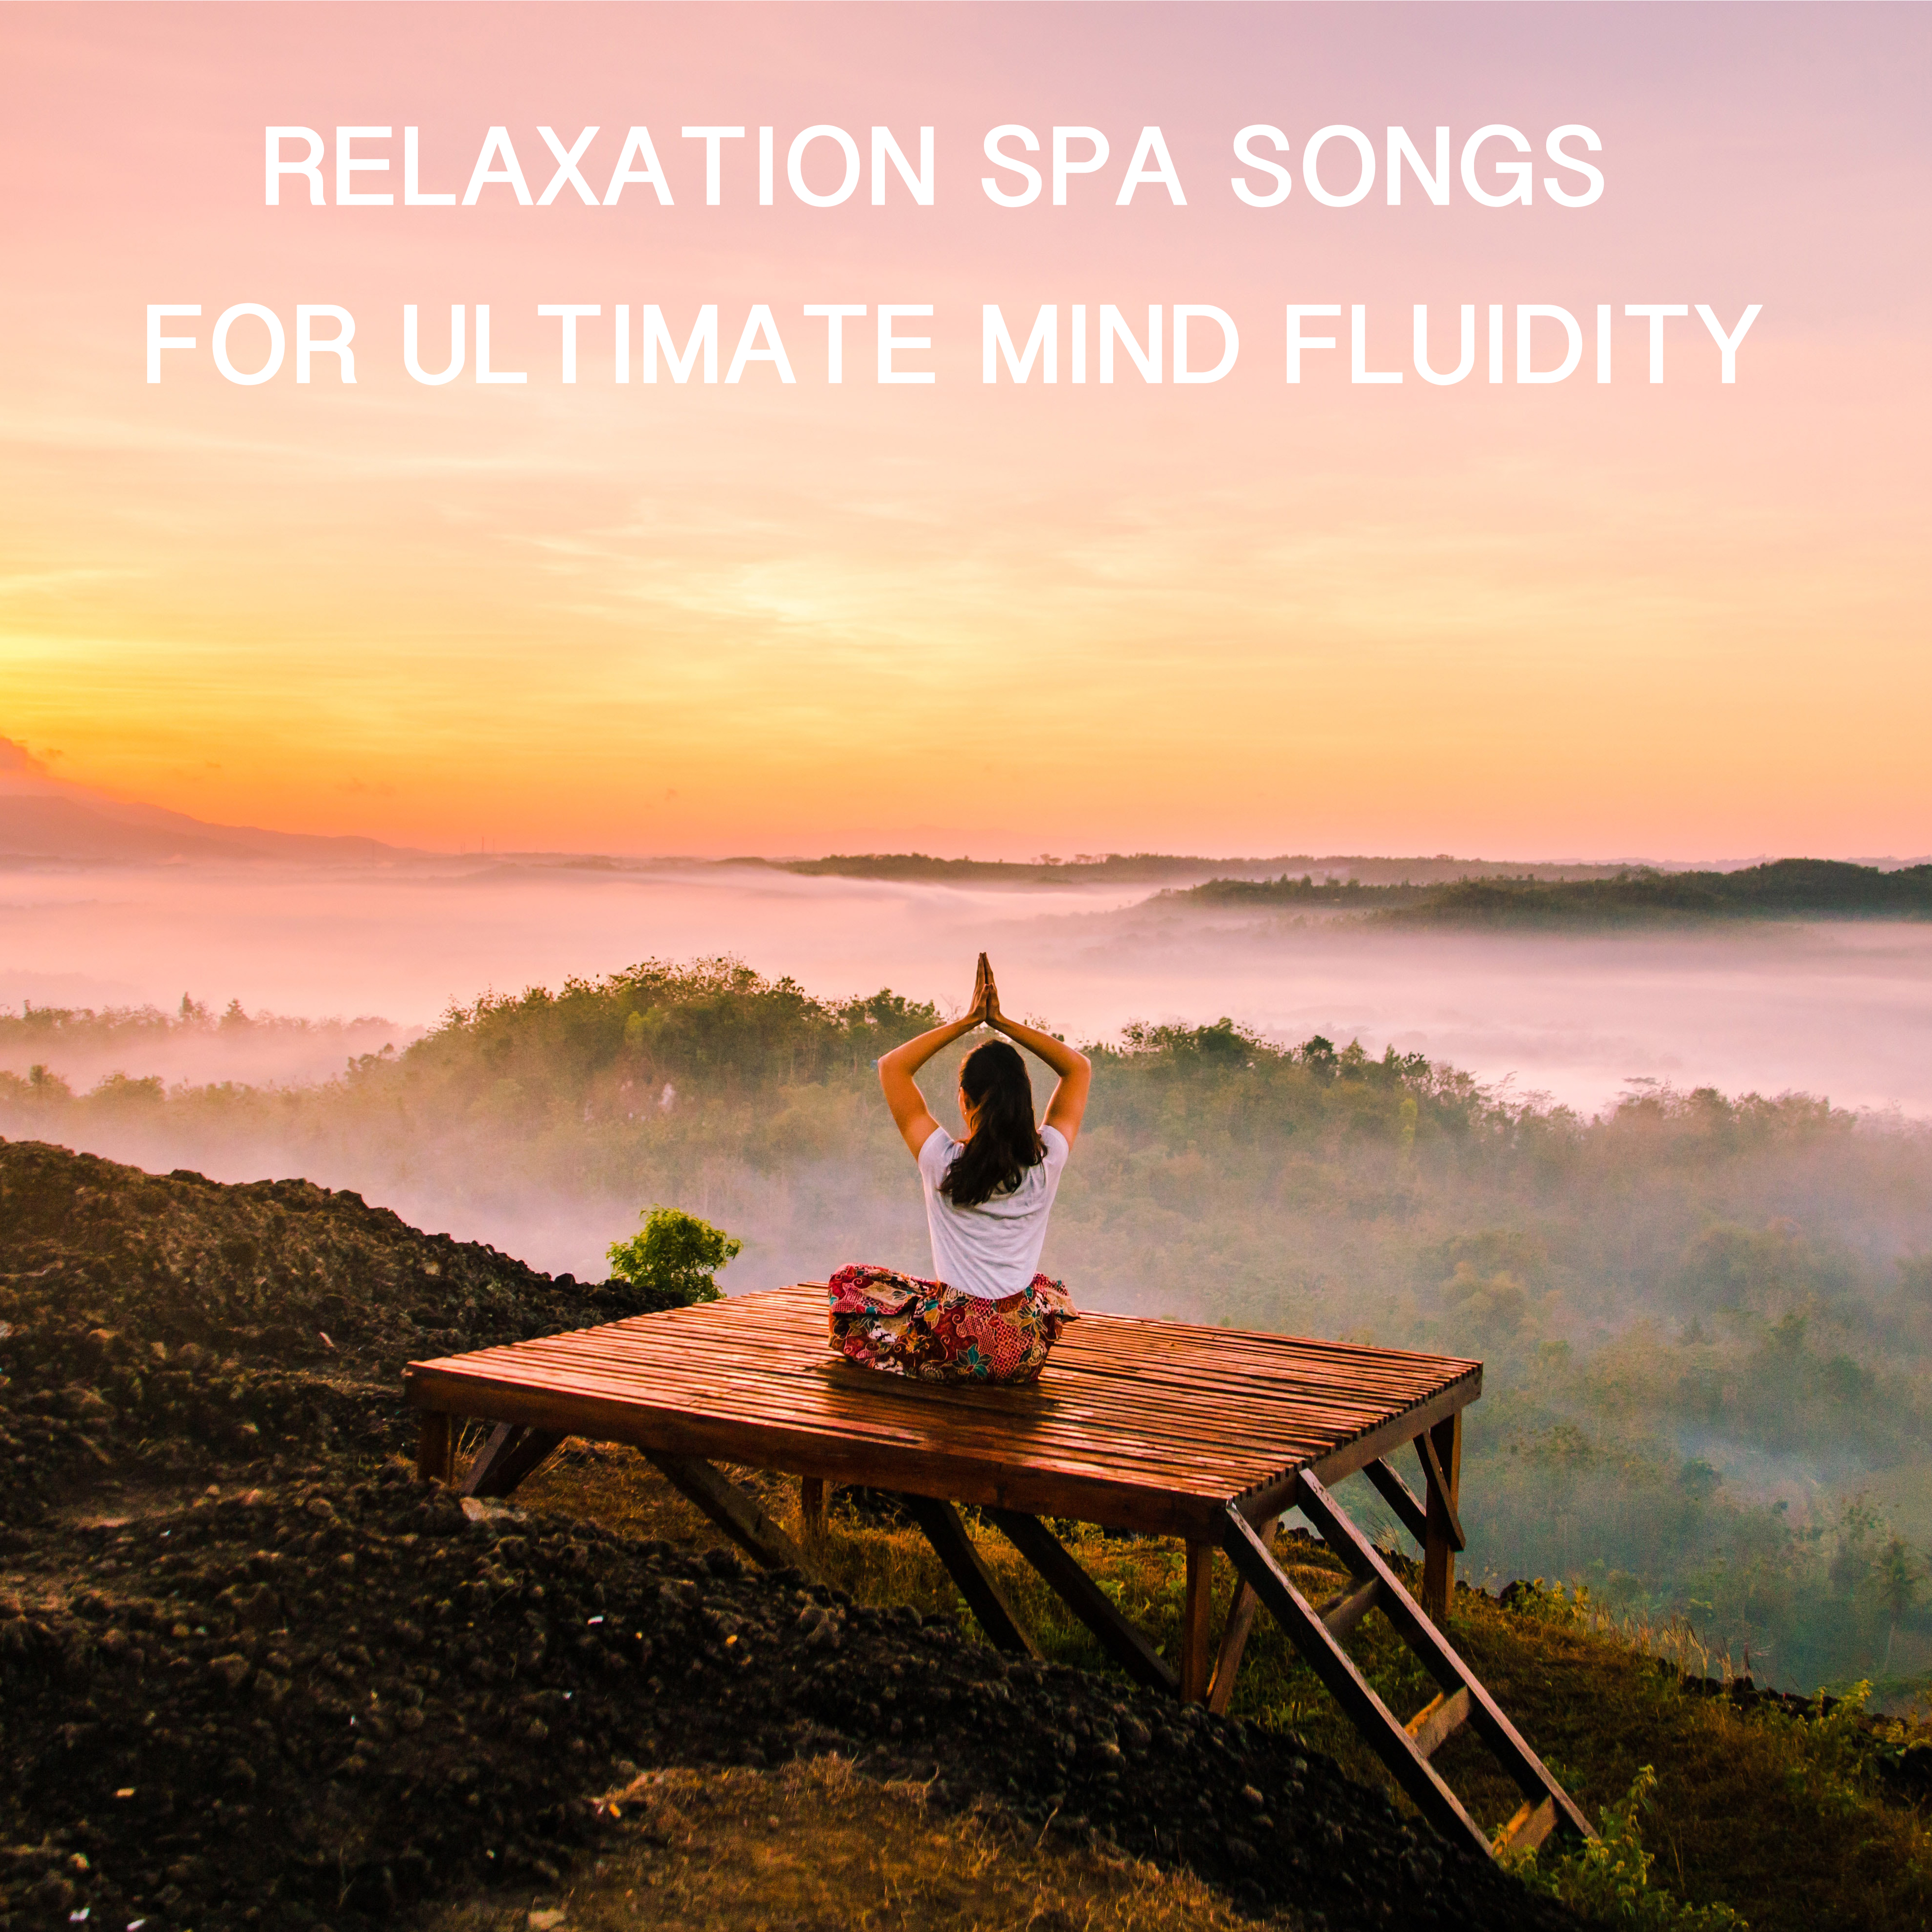 12 Relaxation Spa Songs for Ultimate Mind Fluidity